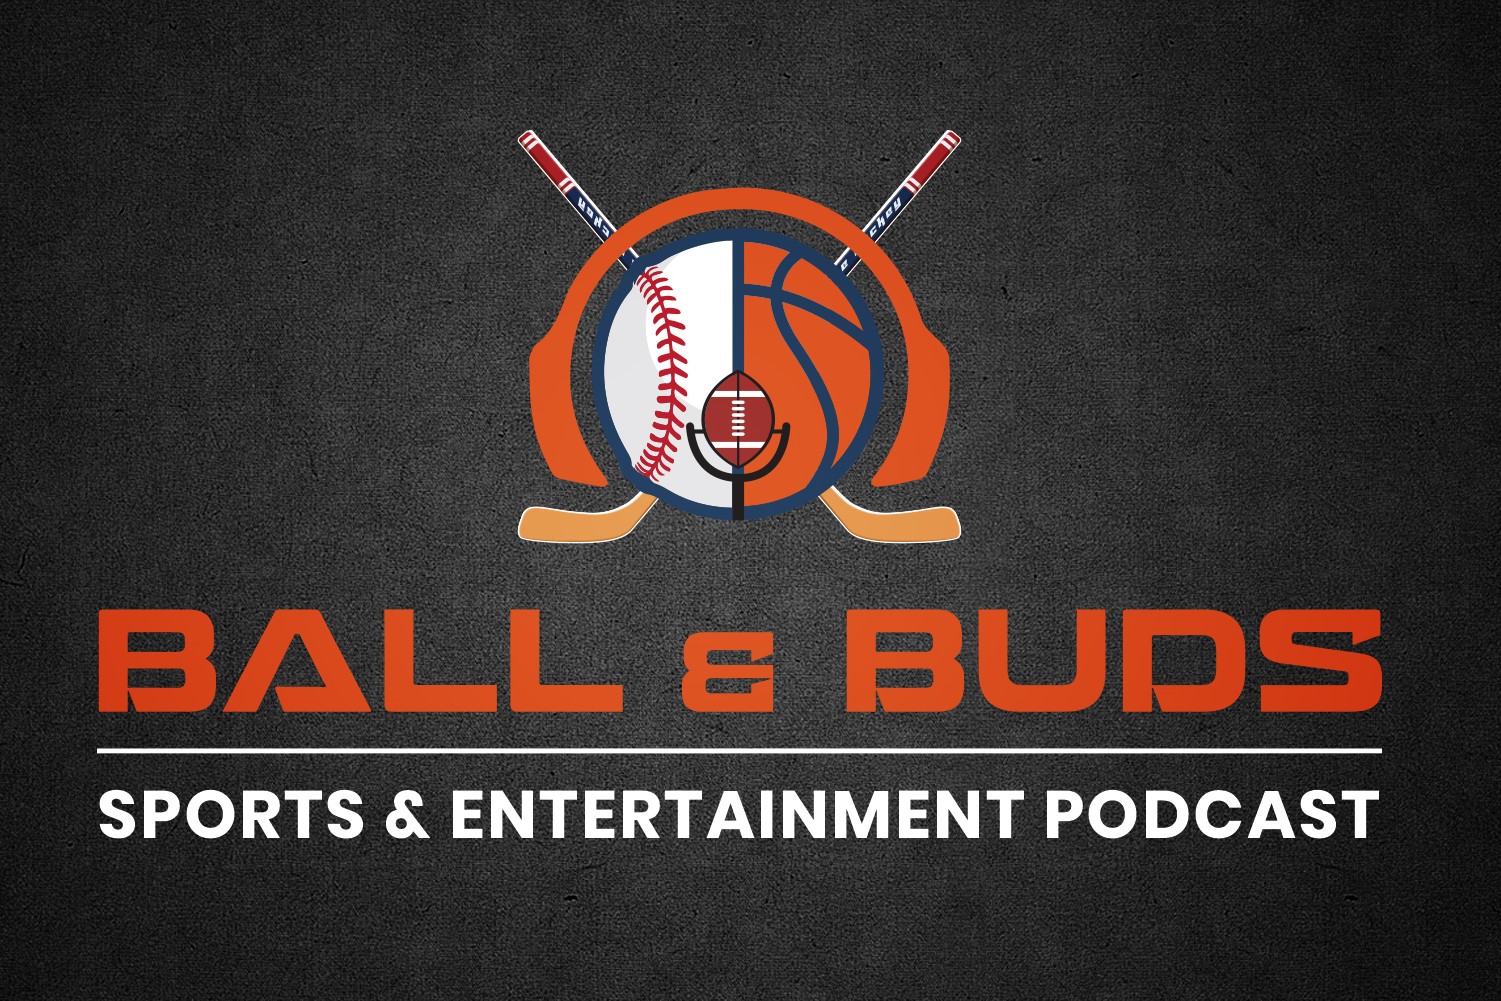 'Boxing News' ft. Combat Sports Insider Deon Clubbs (Ball & Buds Podcast Episode #13)